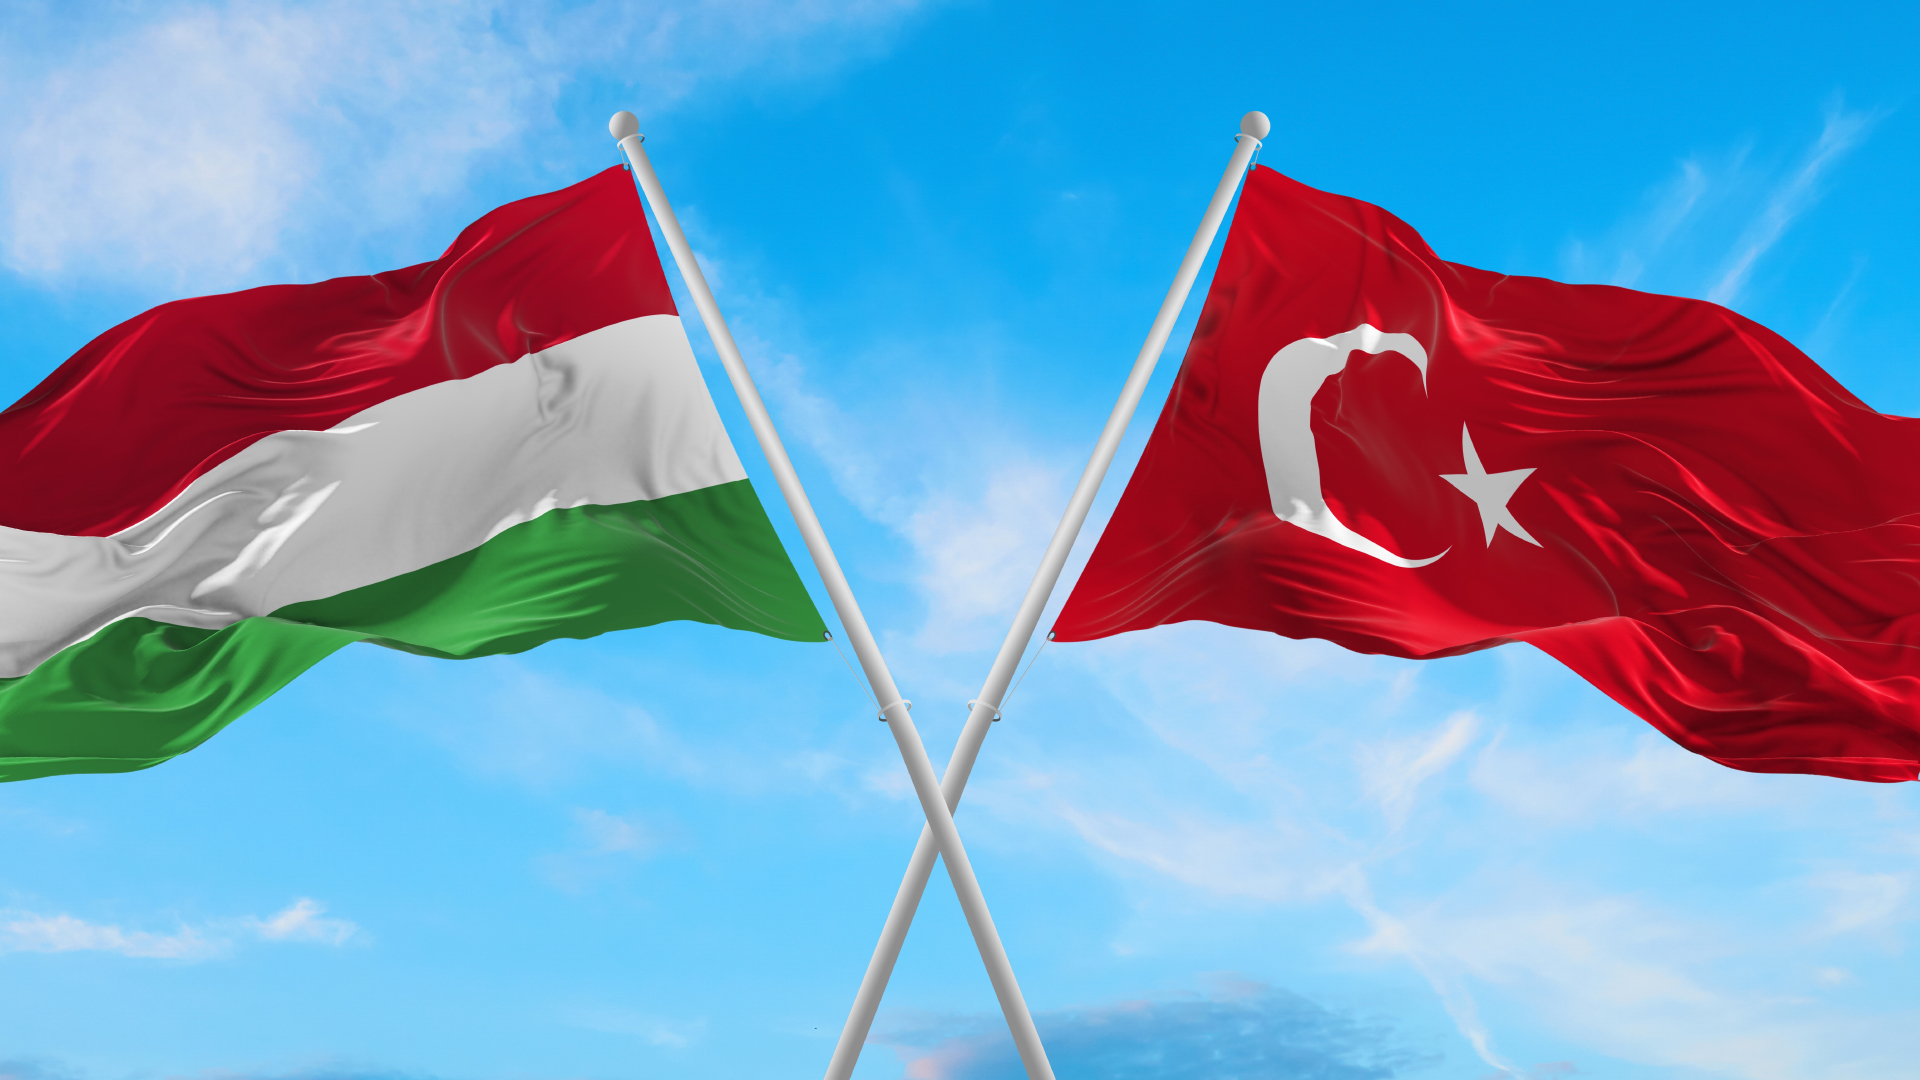 the Hungarian flag and the Turkish flag